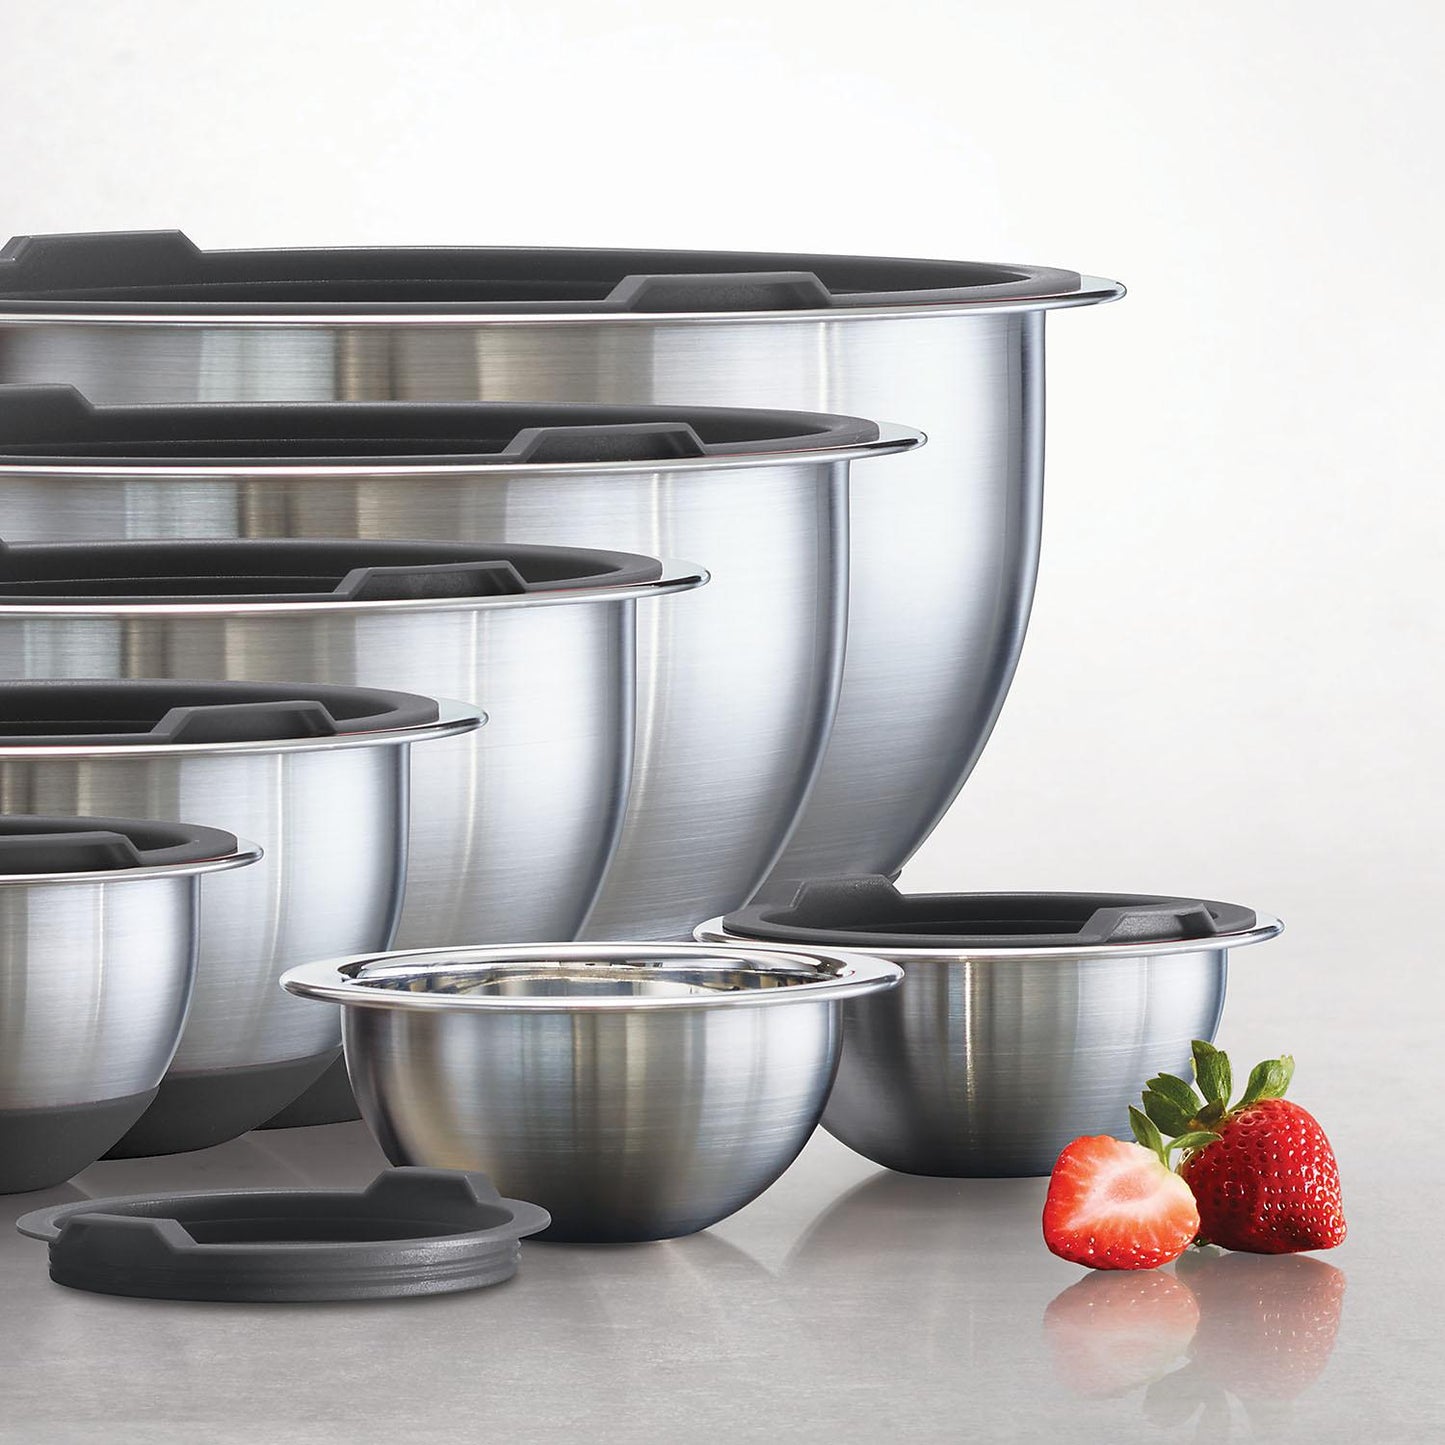 Tramontina 14-piece Stainless Steel Mixing Bowl Set with Lids